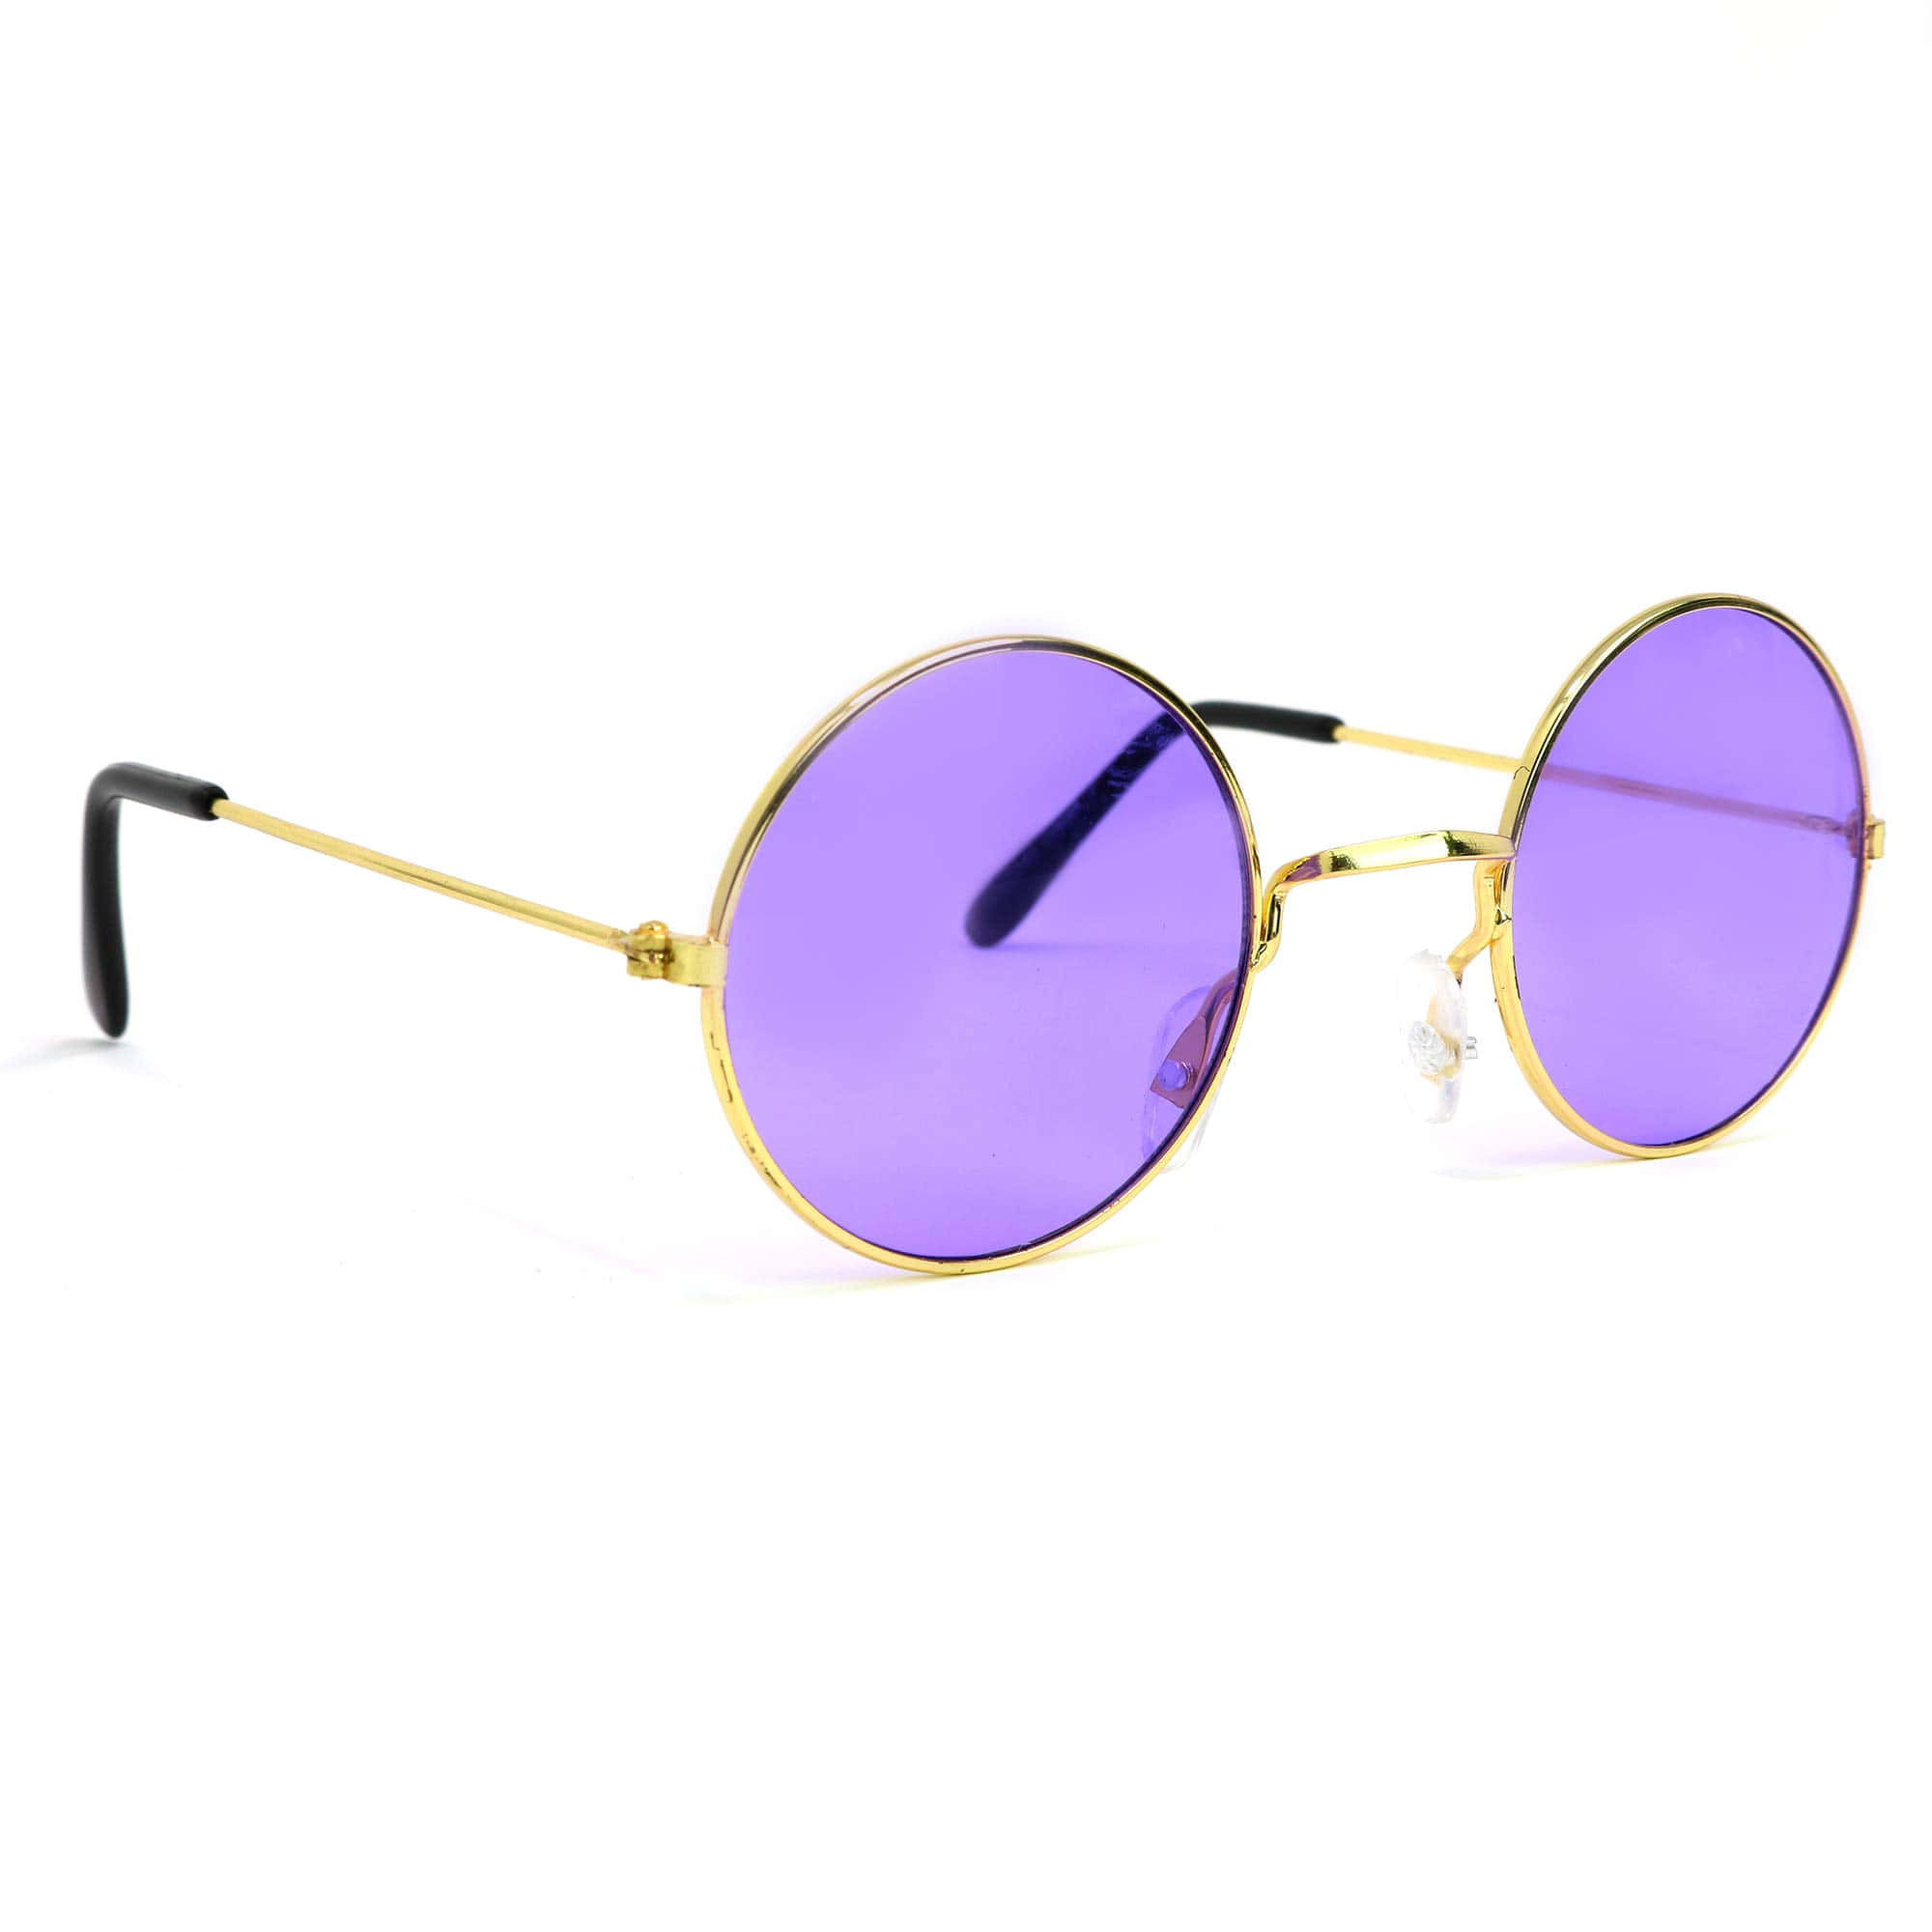 Get noticed by the beach in your stylishly cool purple sunglasses Wallpaper